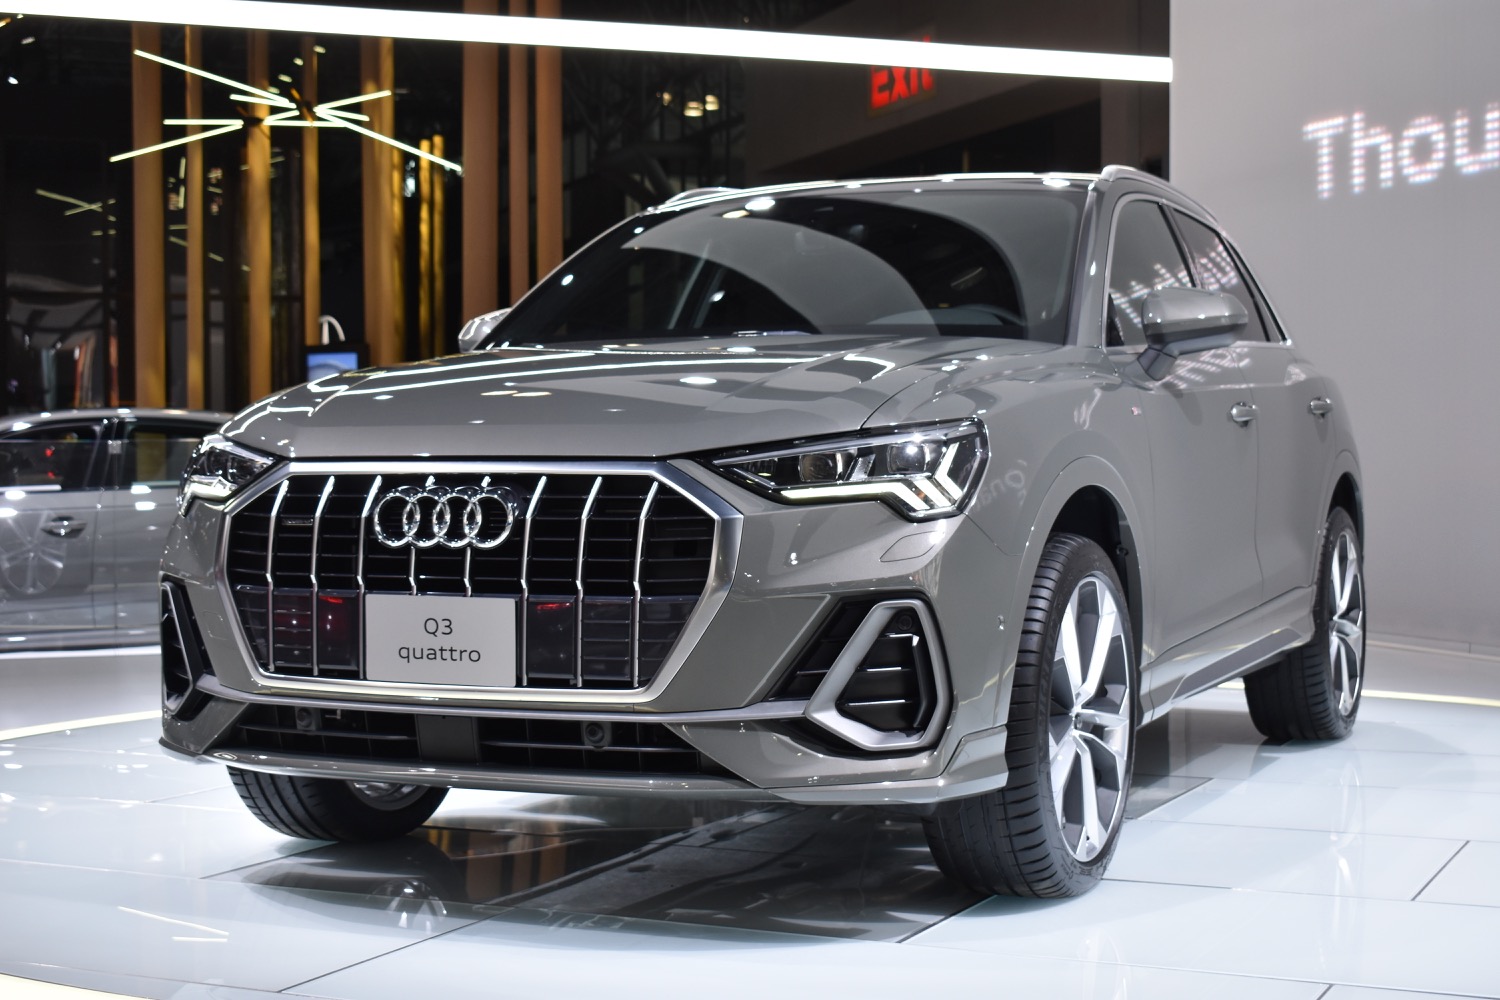 2019 Audi Q3 Brings More Tech and Luxury to the Subcompact Segment